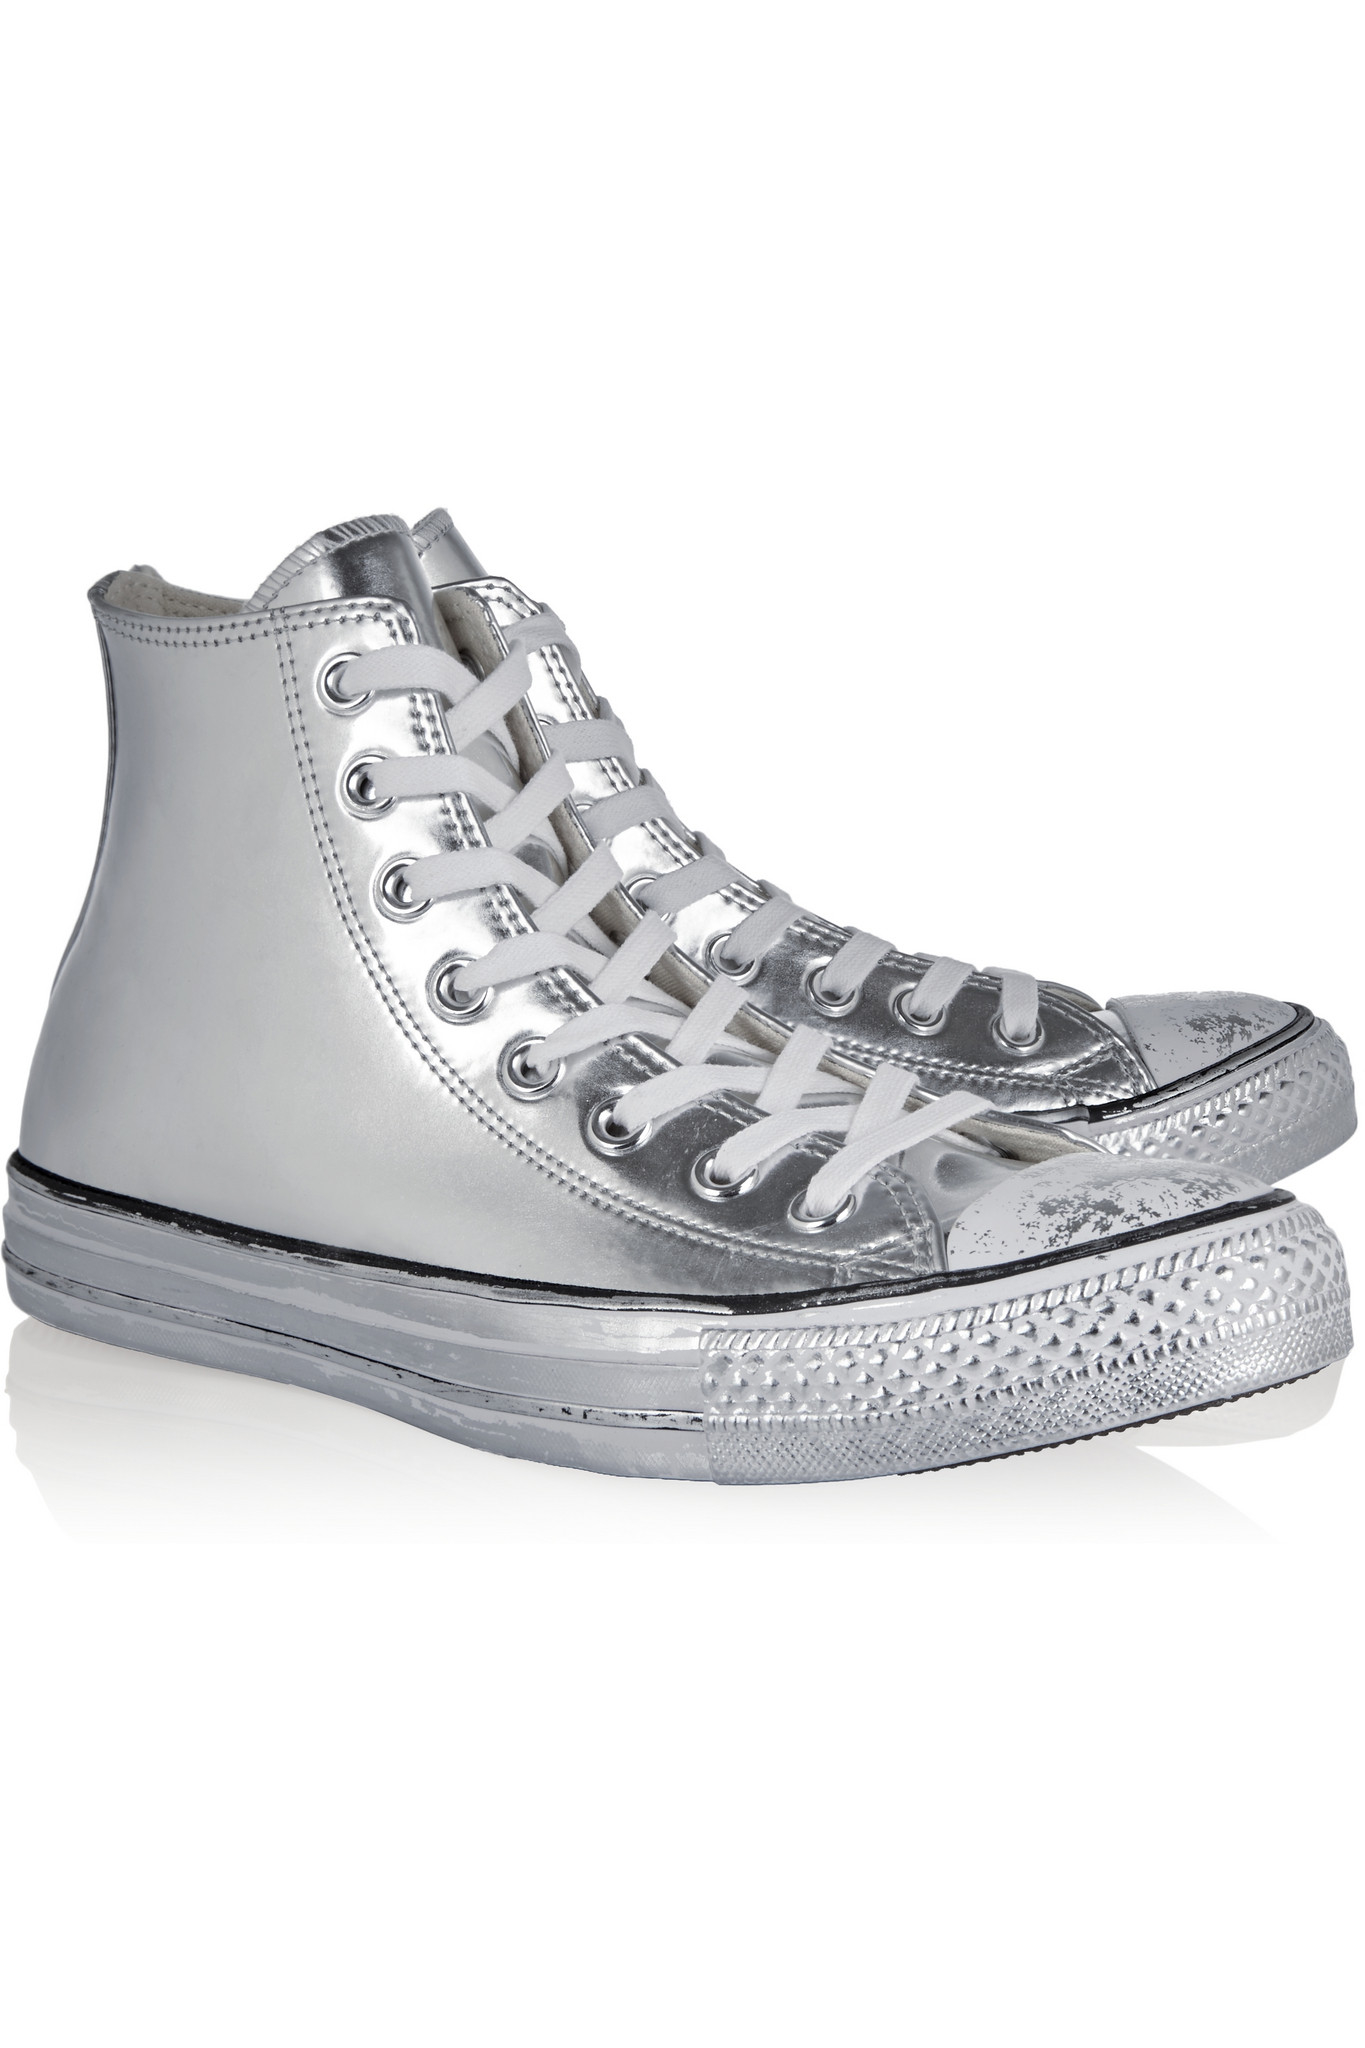 holographic converse high tops